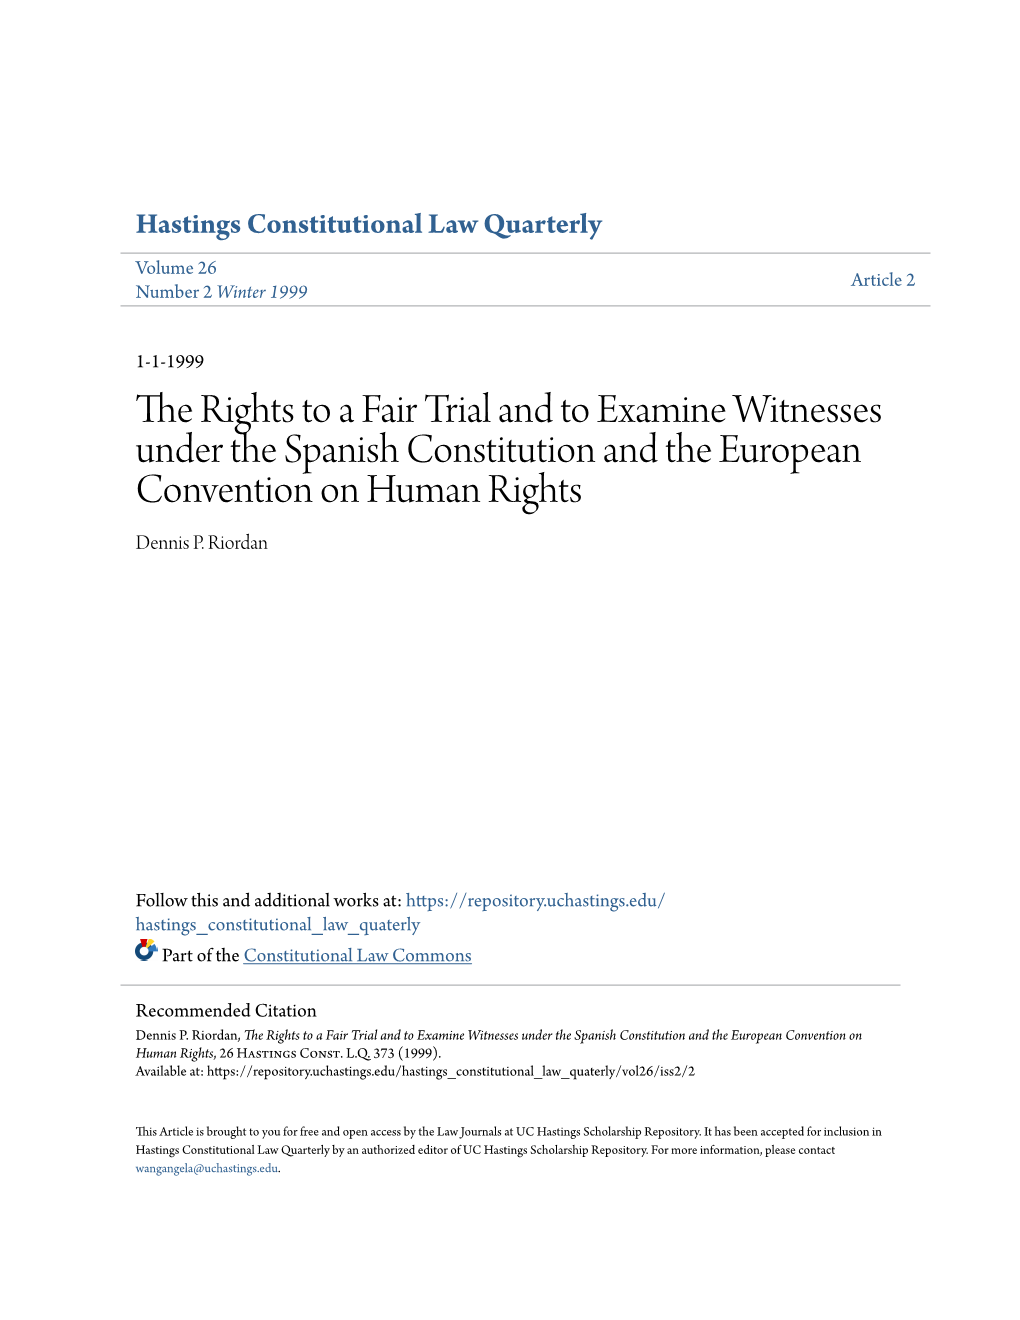 The Rights to a Fair Trial and to Examine Witnesses Under the Spanish Constitution and the European Convention on Human Rights Dennis P